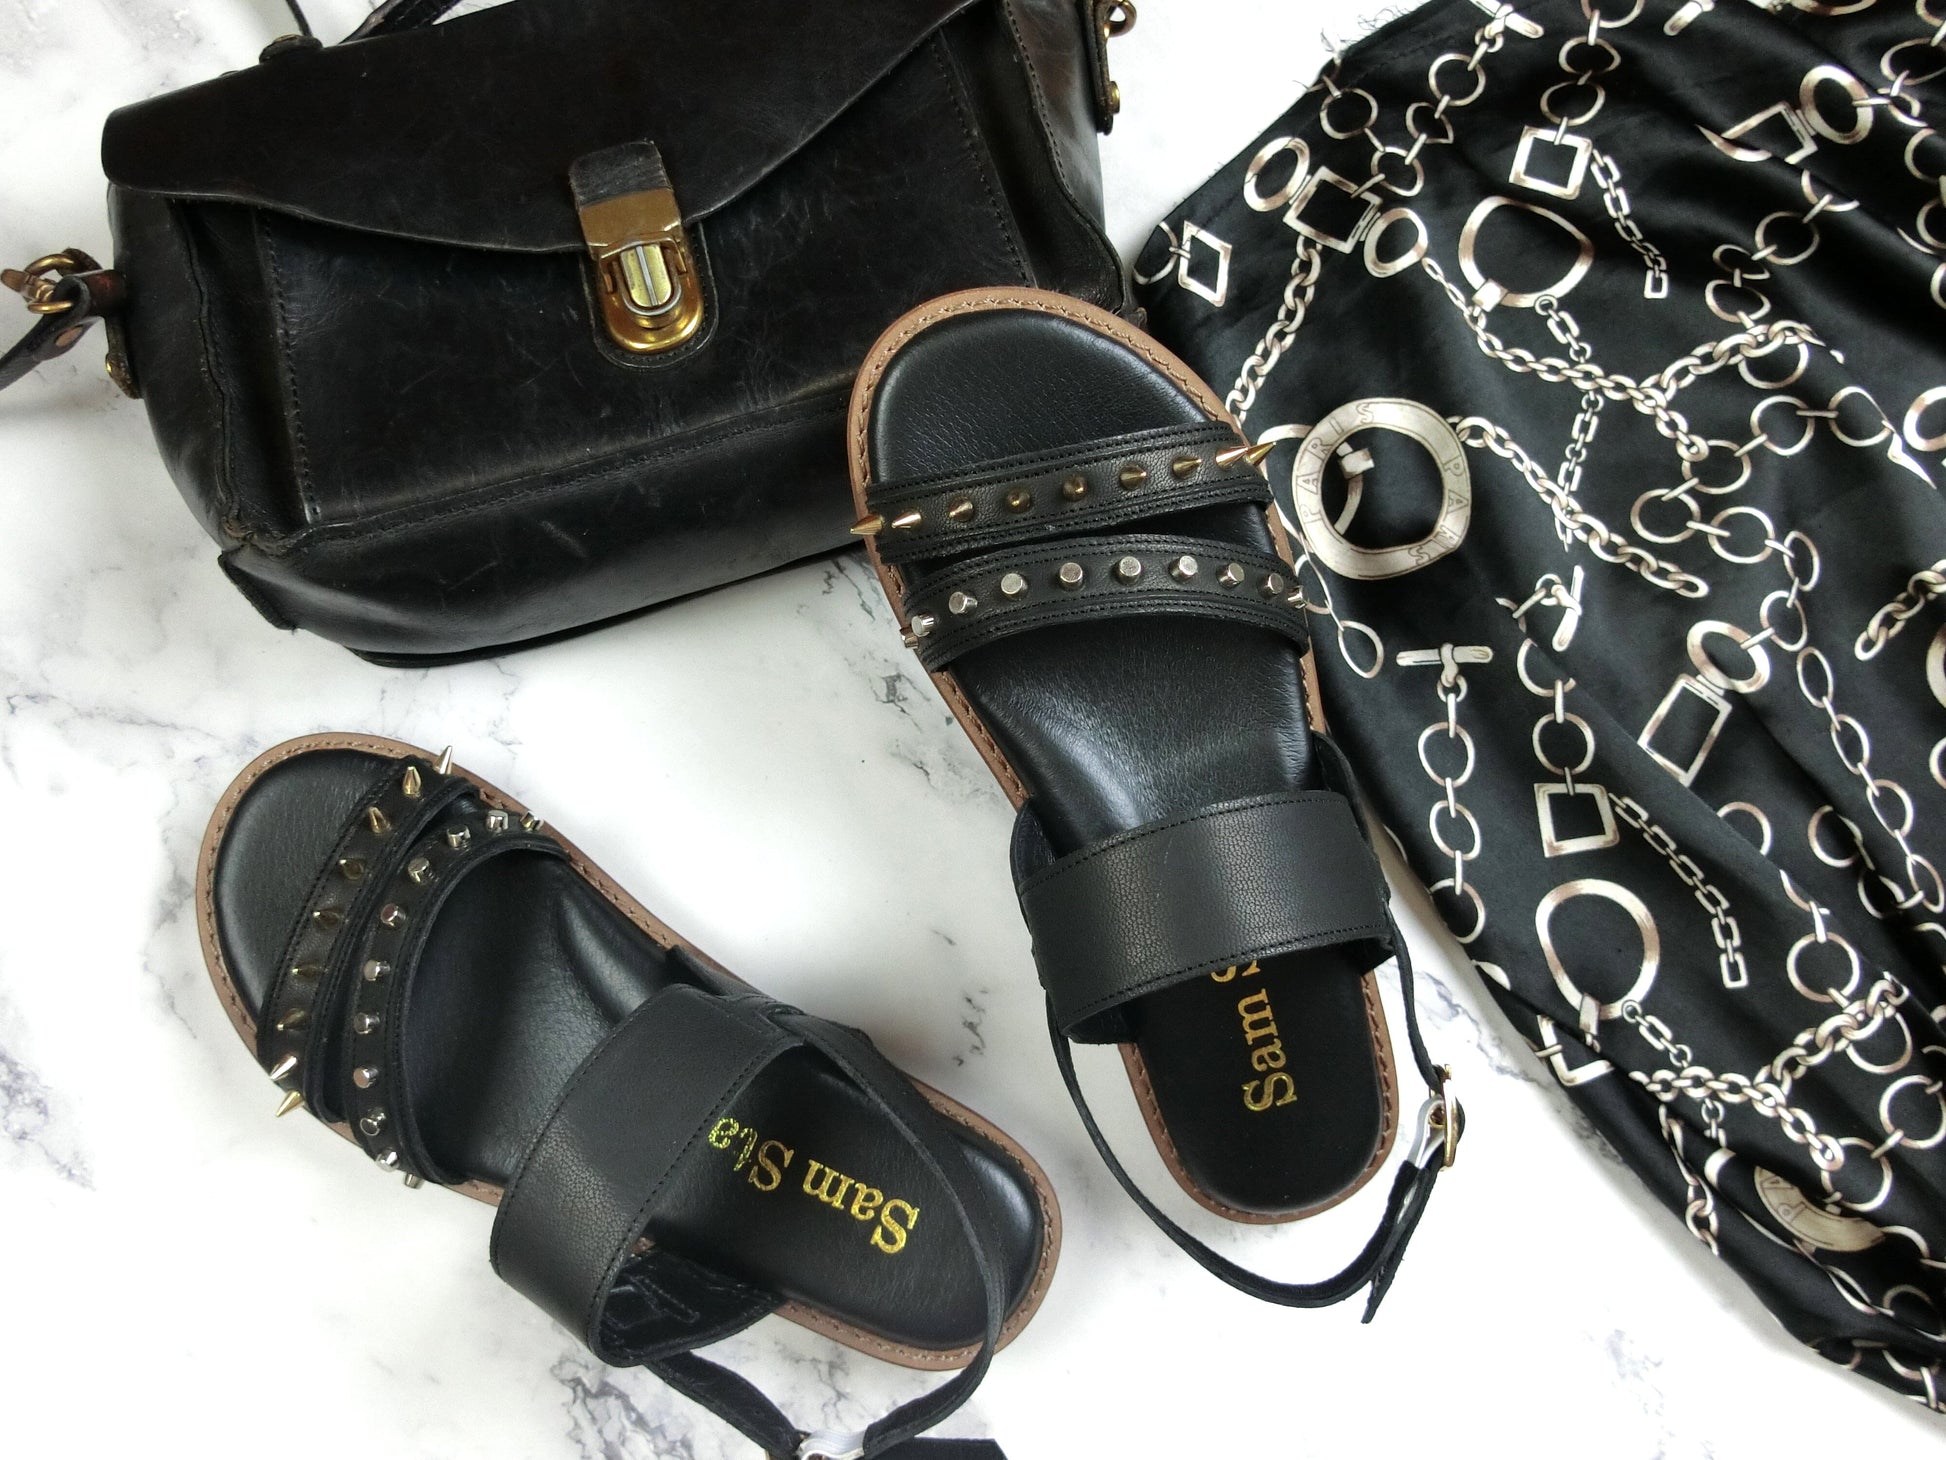 SS22018/19 Leather flat sandals with studs detail Sam Star Shoes Black 7 (40) 